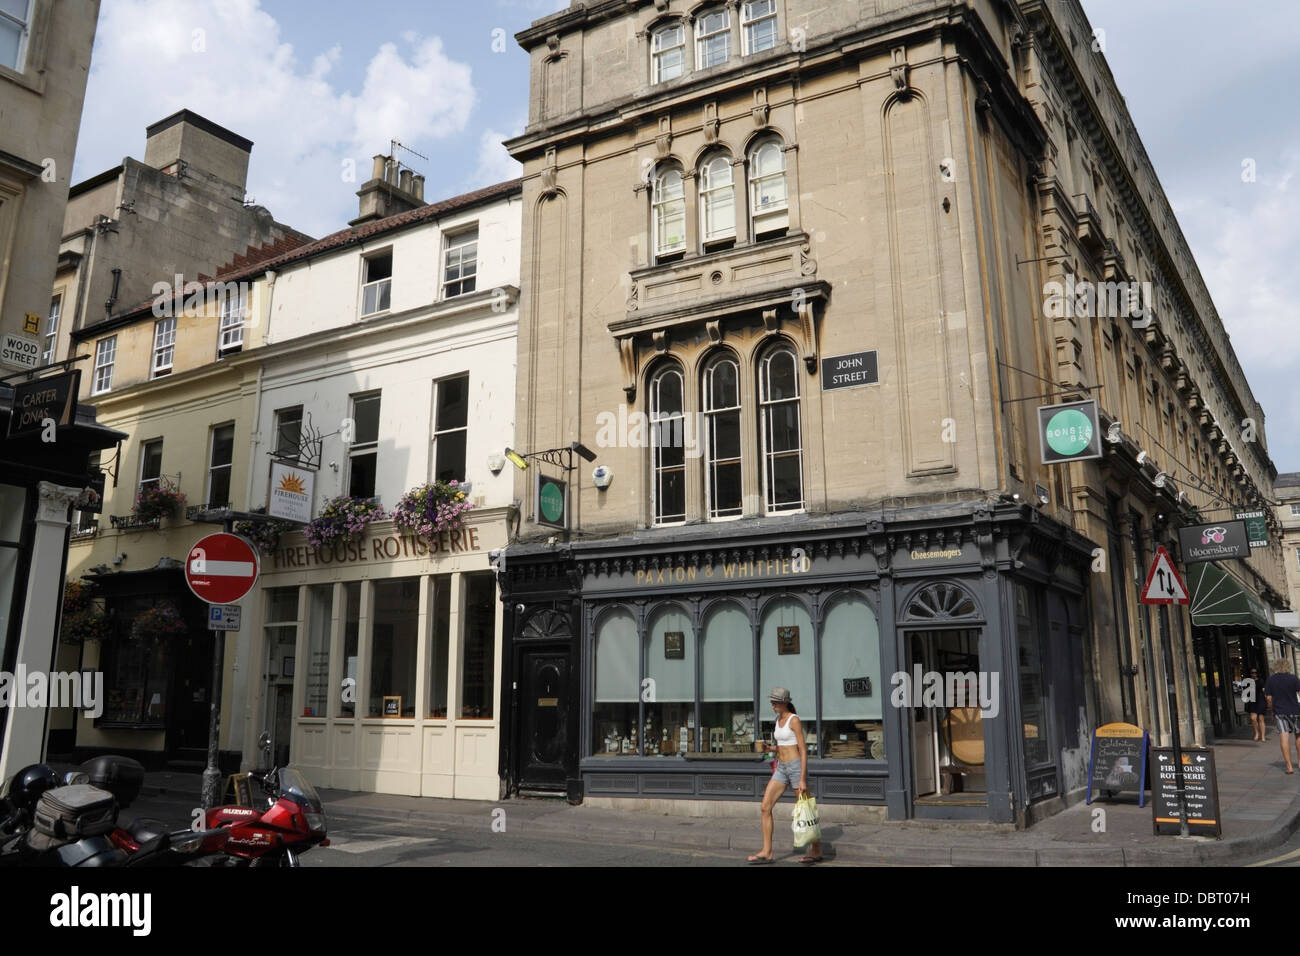 A street scene in Bath city centre England. Georgian properties used for shops Stock Photo